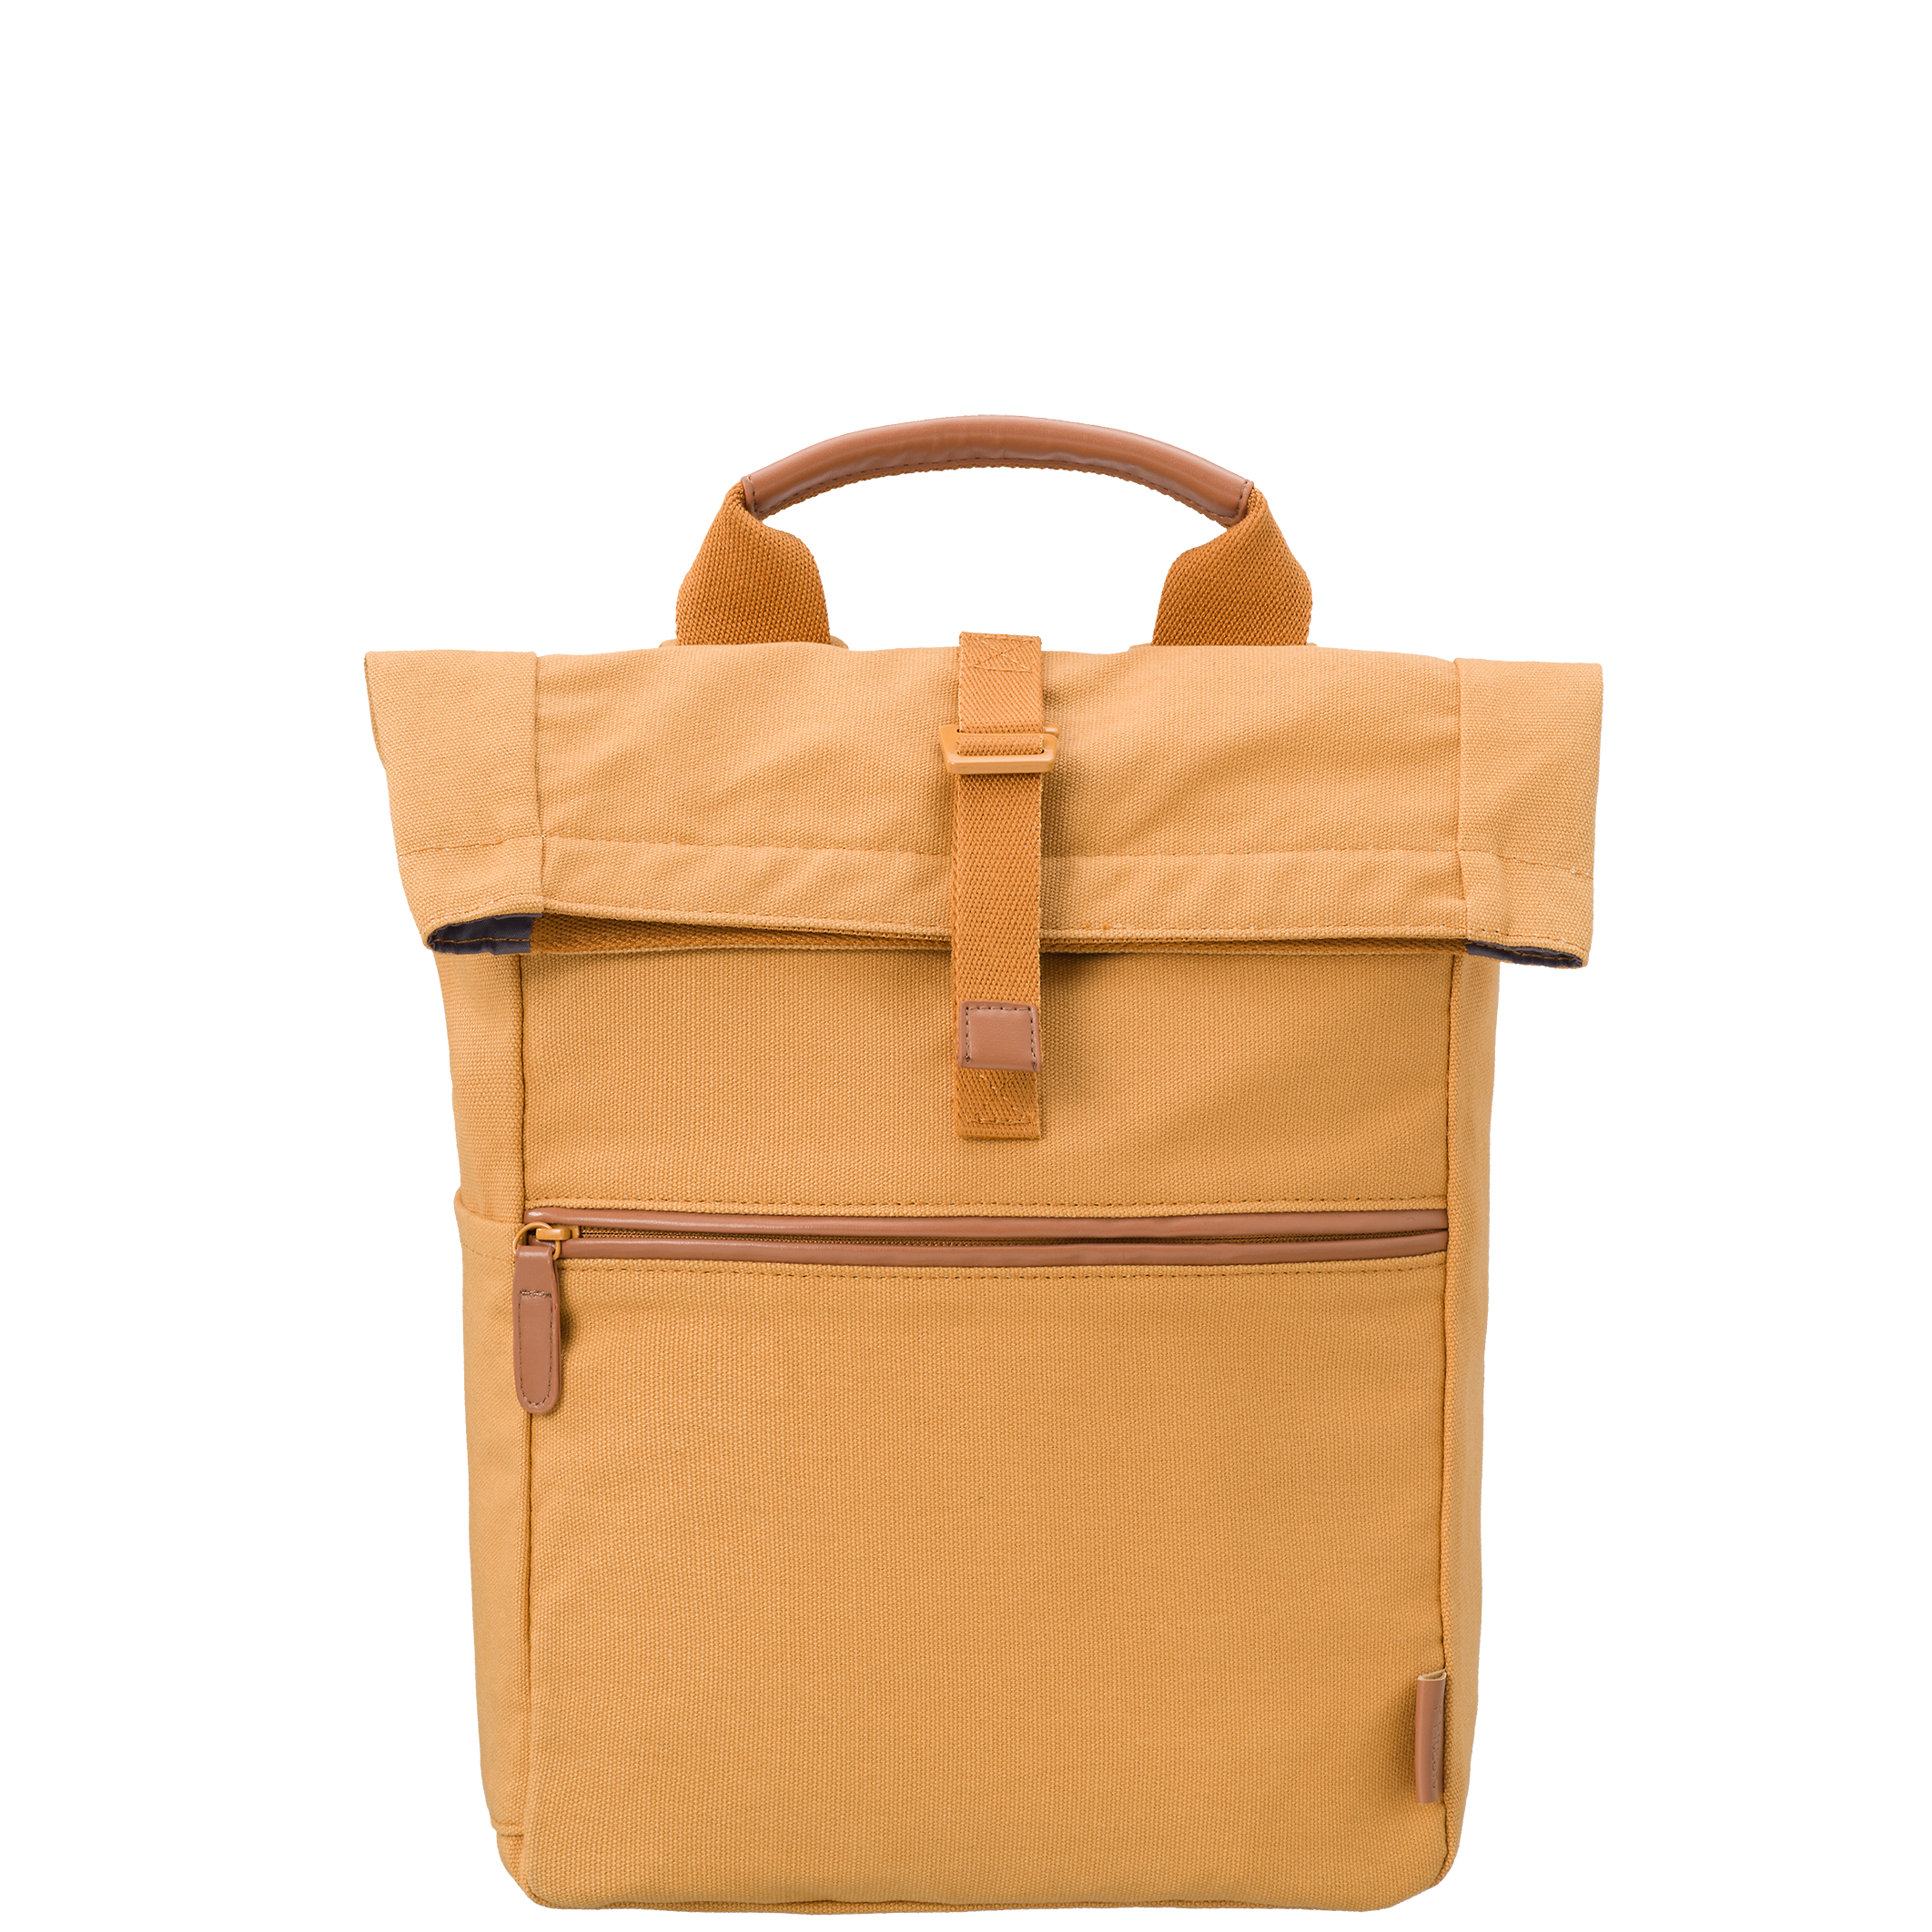 Children's backpack "Small Amber Gold"